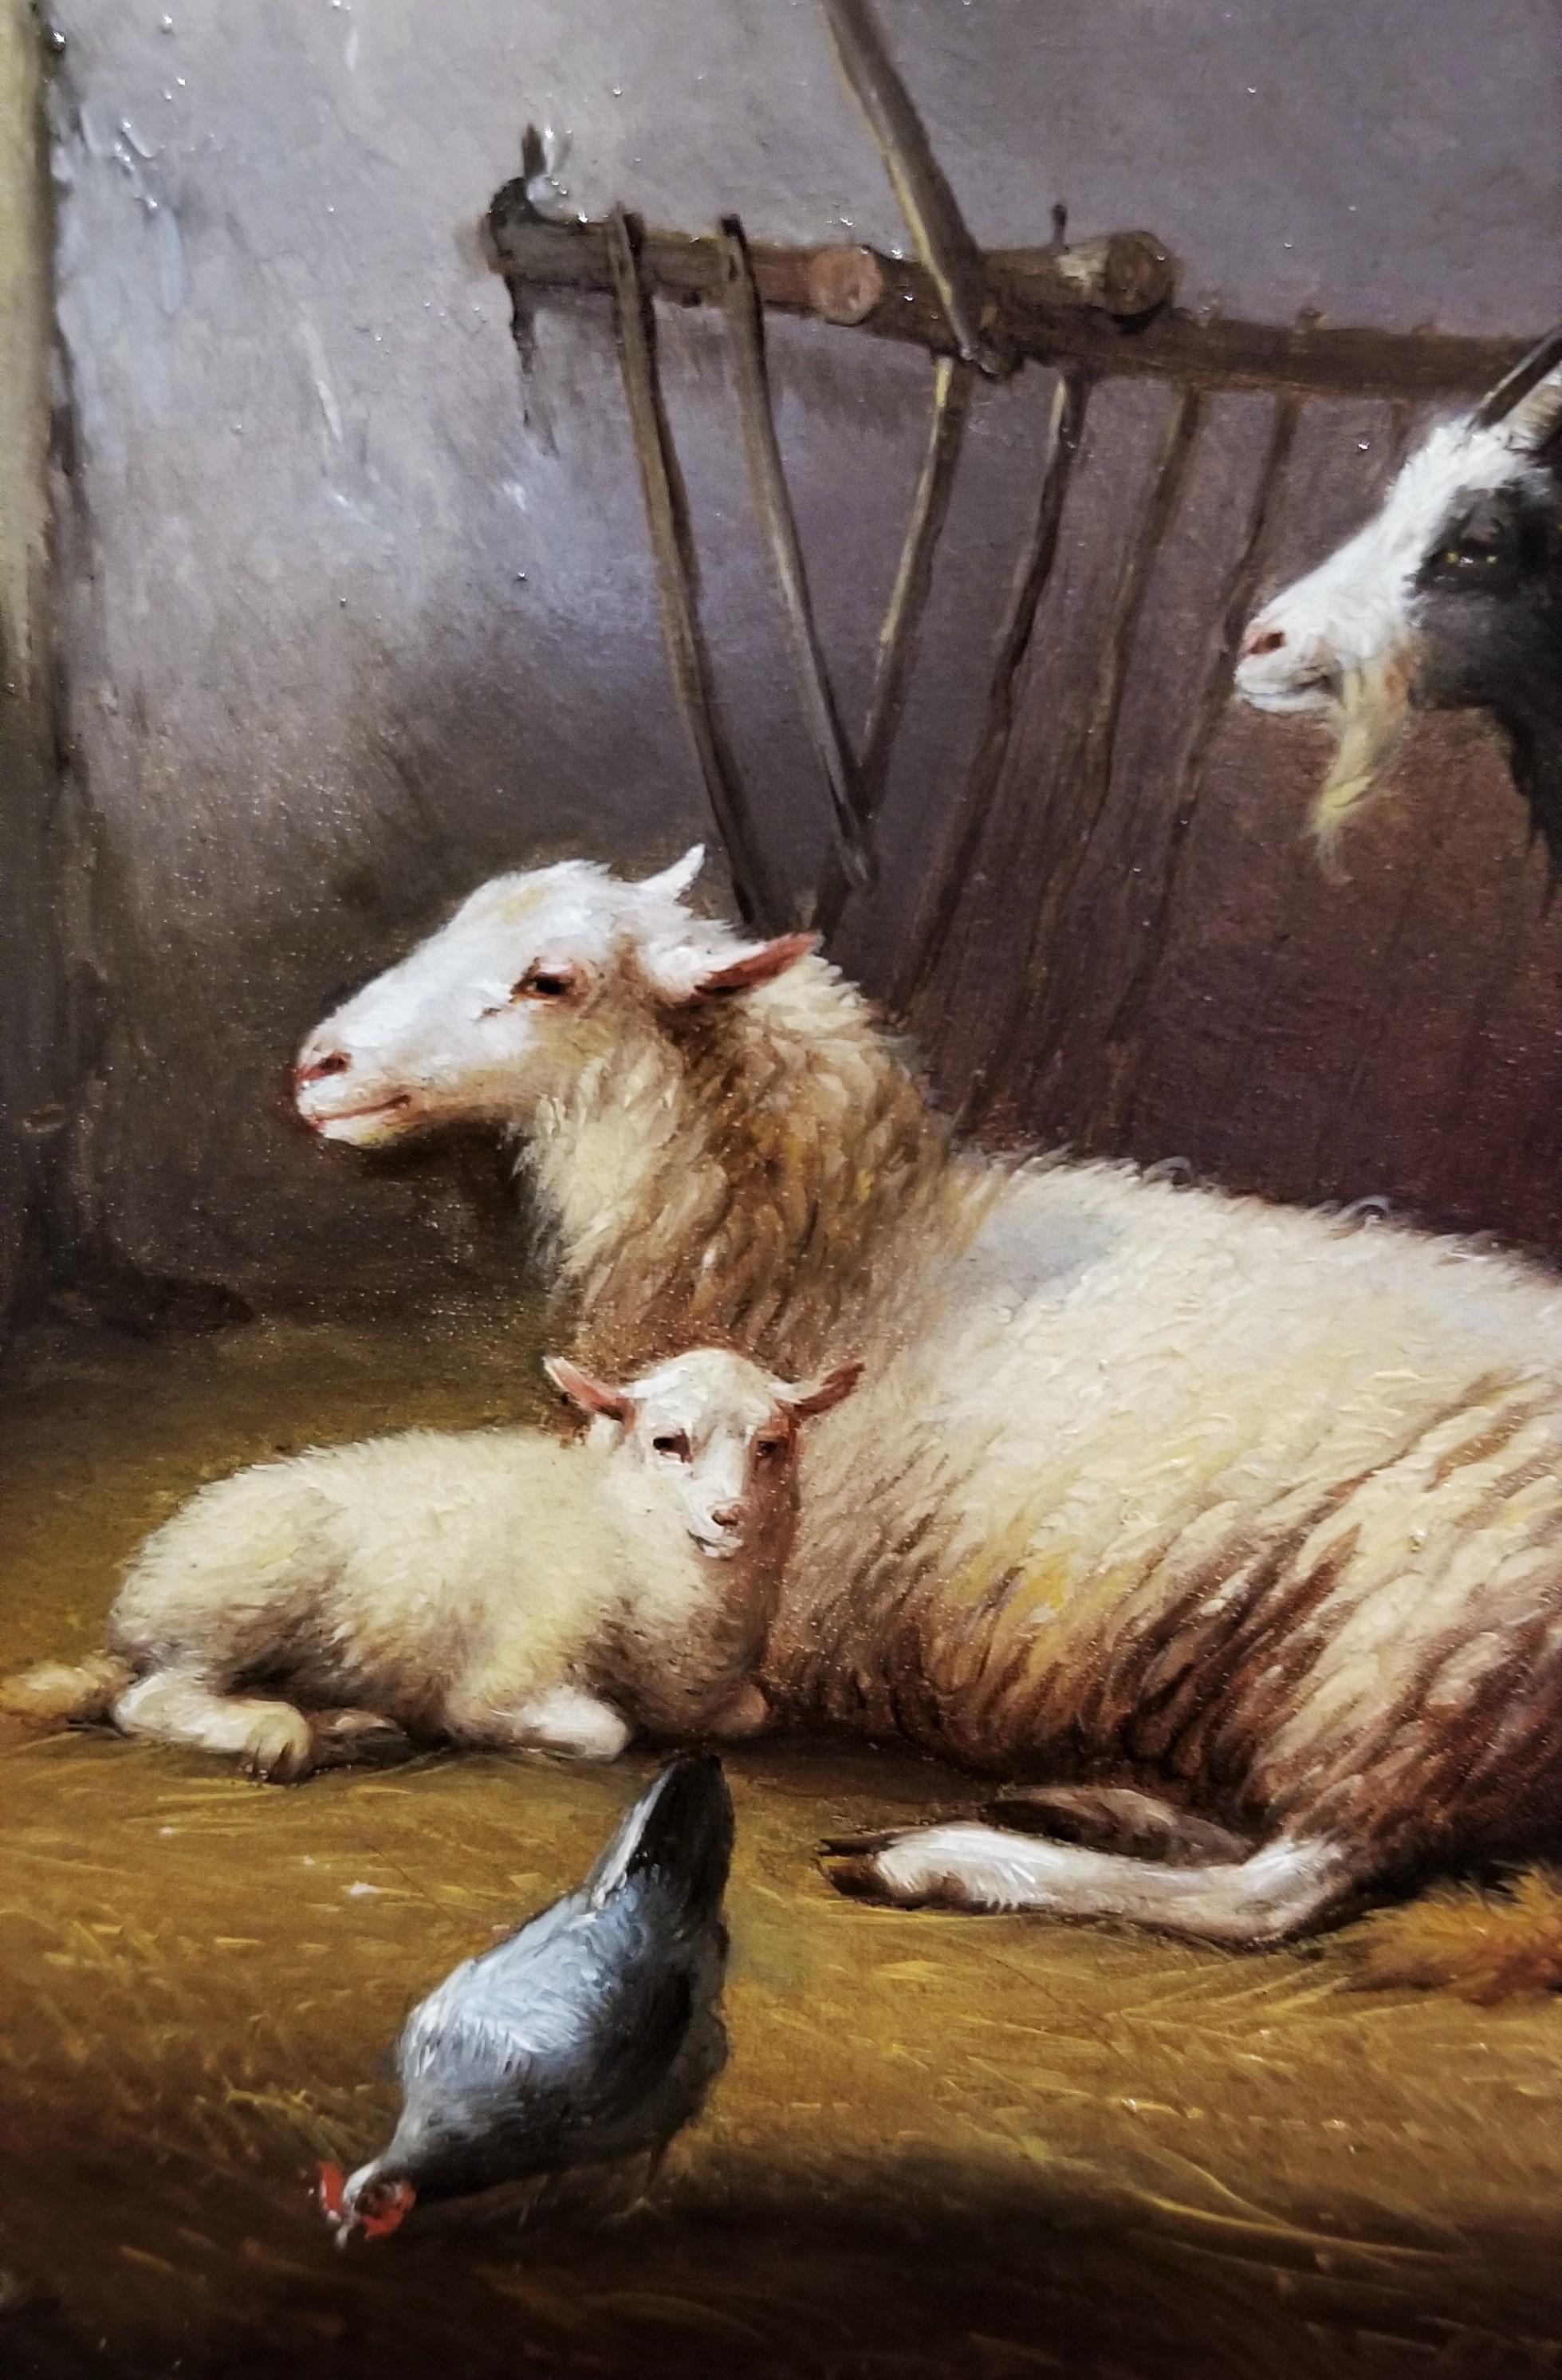 Goat, Sheep, and Chickens in the Stable 3